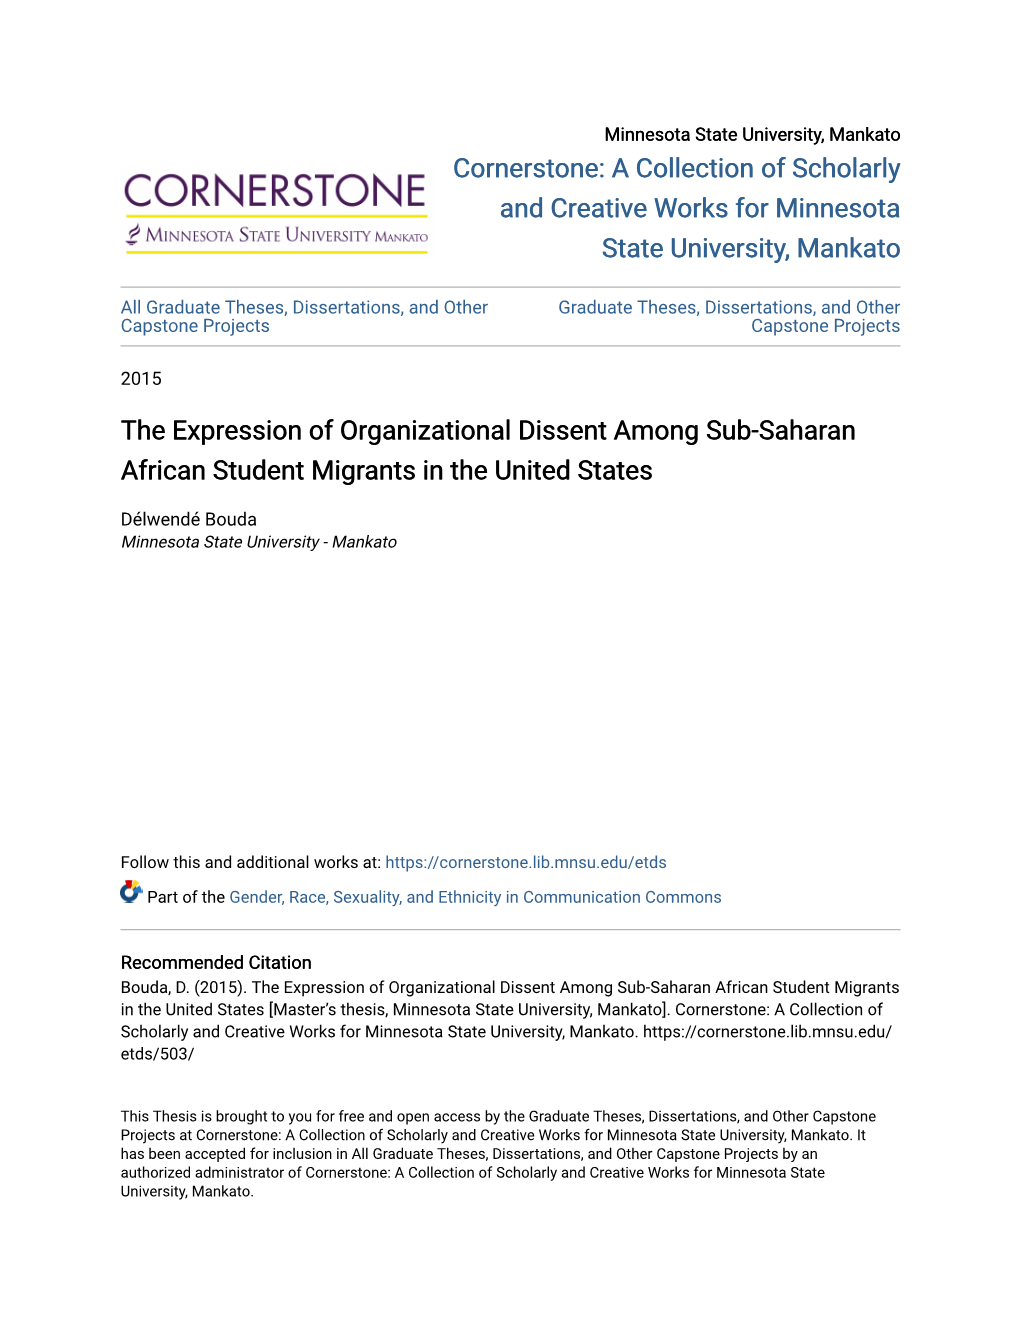 The Expression of Organizational Dissent Among Sub-Saharan African Student Migrants in the United States